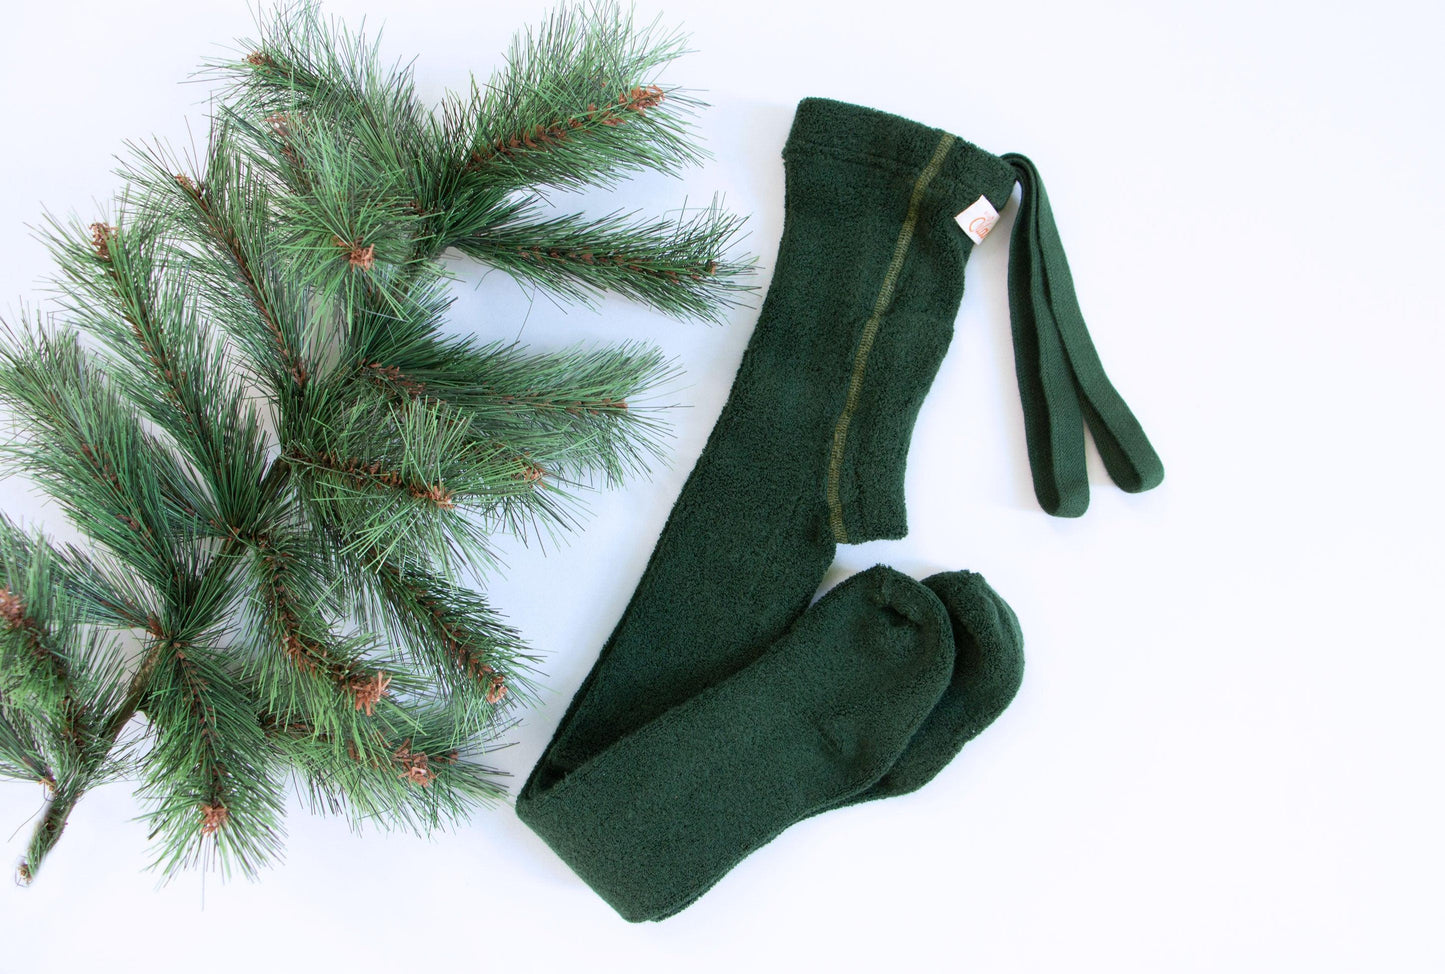 Strumpfhose Teddy Warmy Footed 'Dark Forest Green' - The Little One • Family.Concept.Store. 